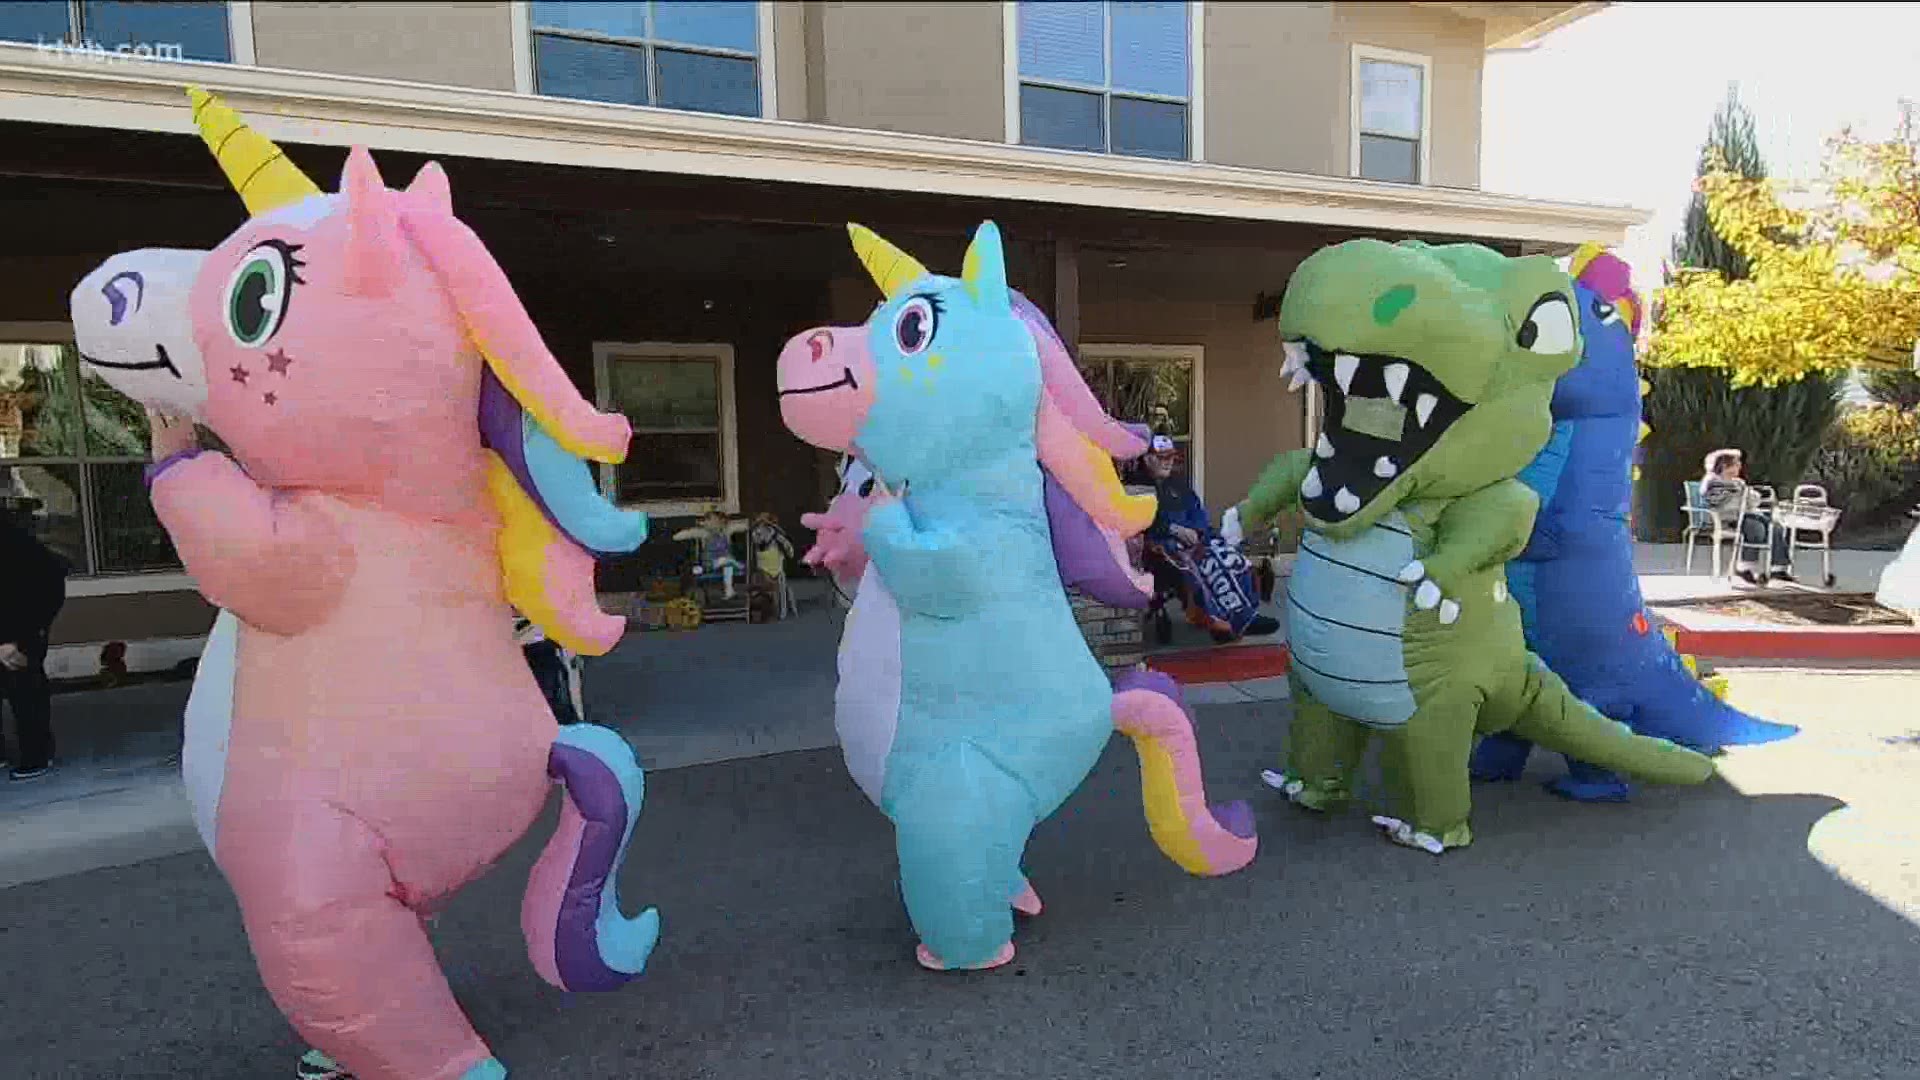 Healthcare Share Treasure Valley organized a parade for seniors in care facilities, but this parade included something a bit unusual that made the residents smile.